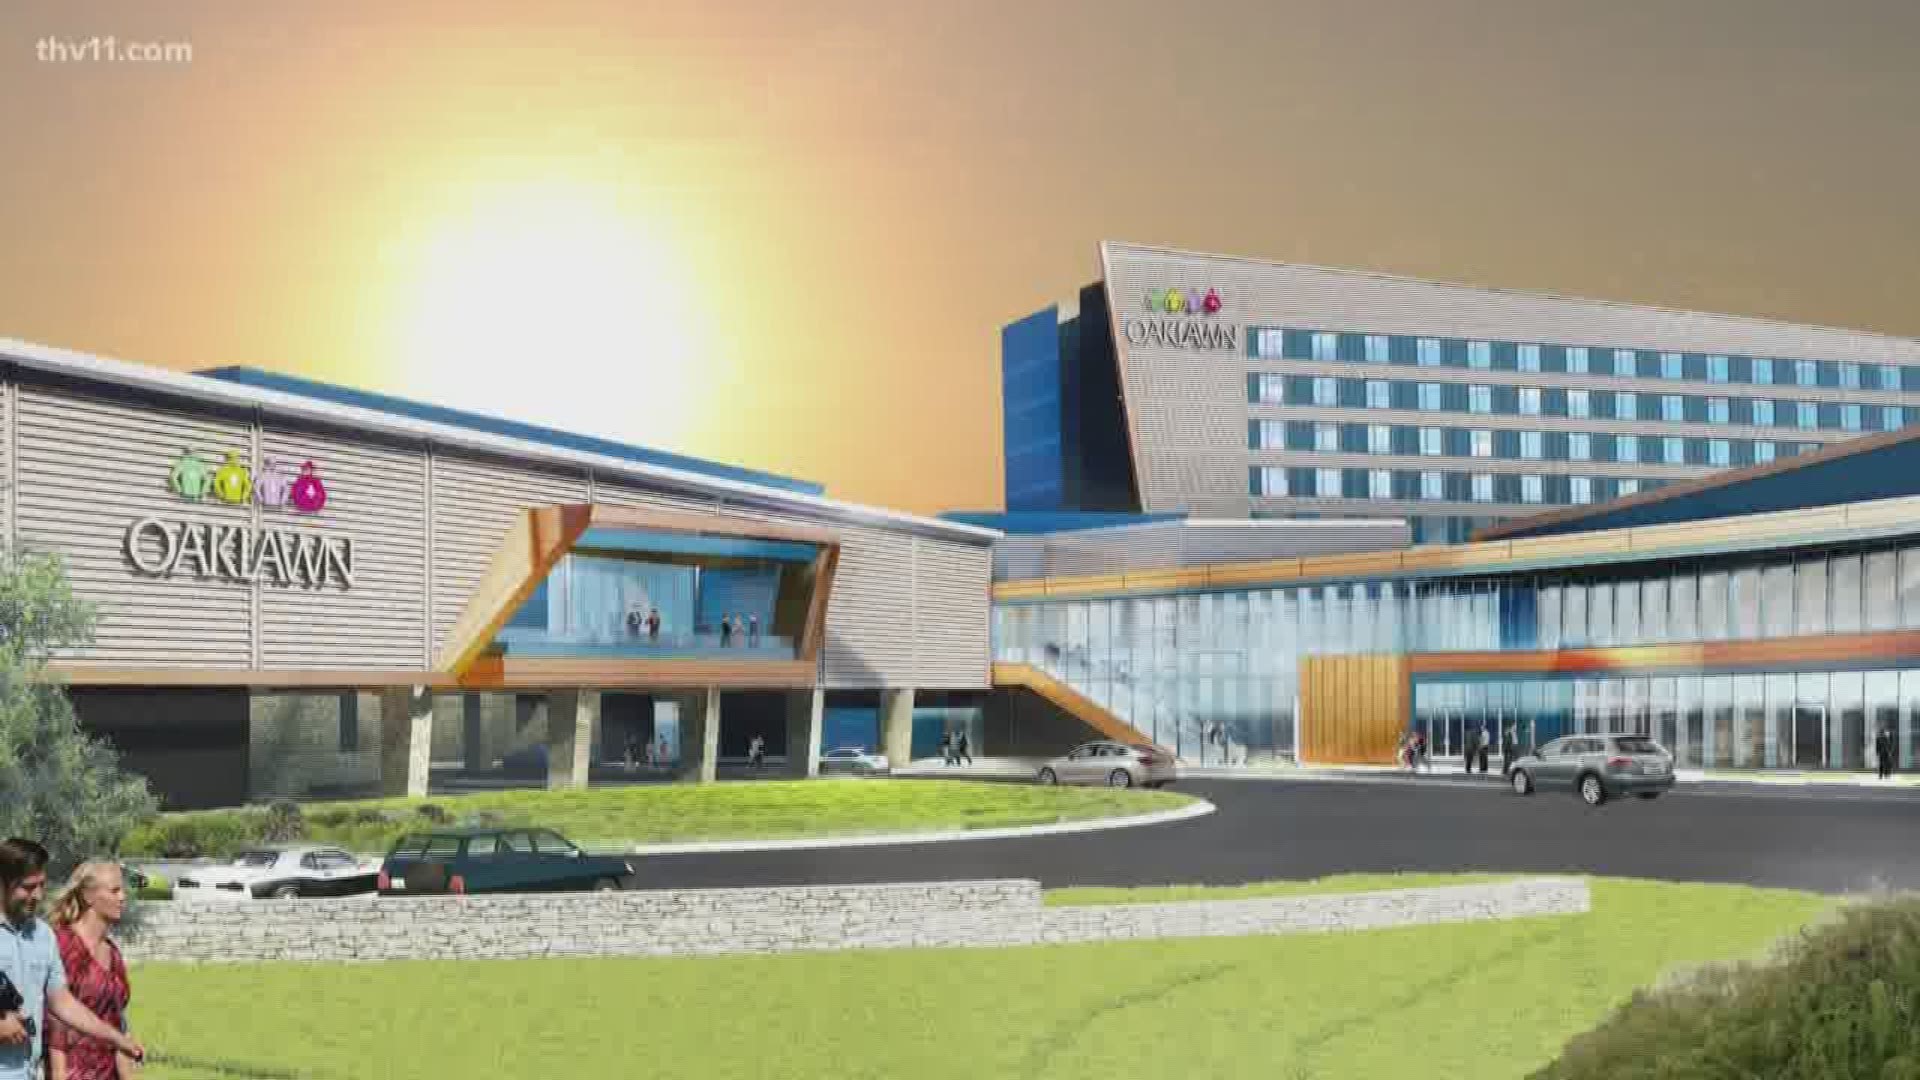 Oaklawn is getting ready to construct a $100 million expansion.